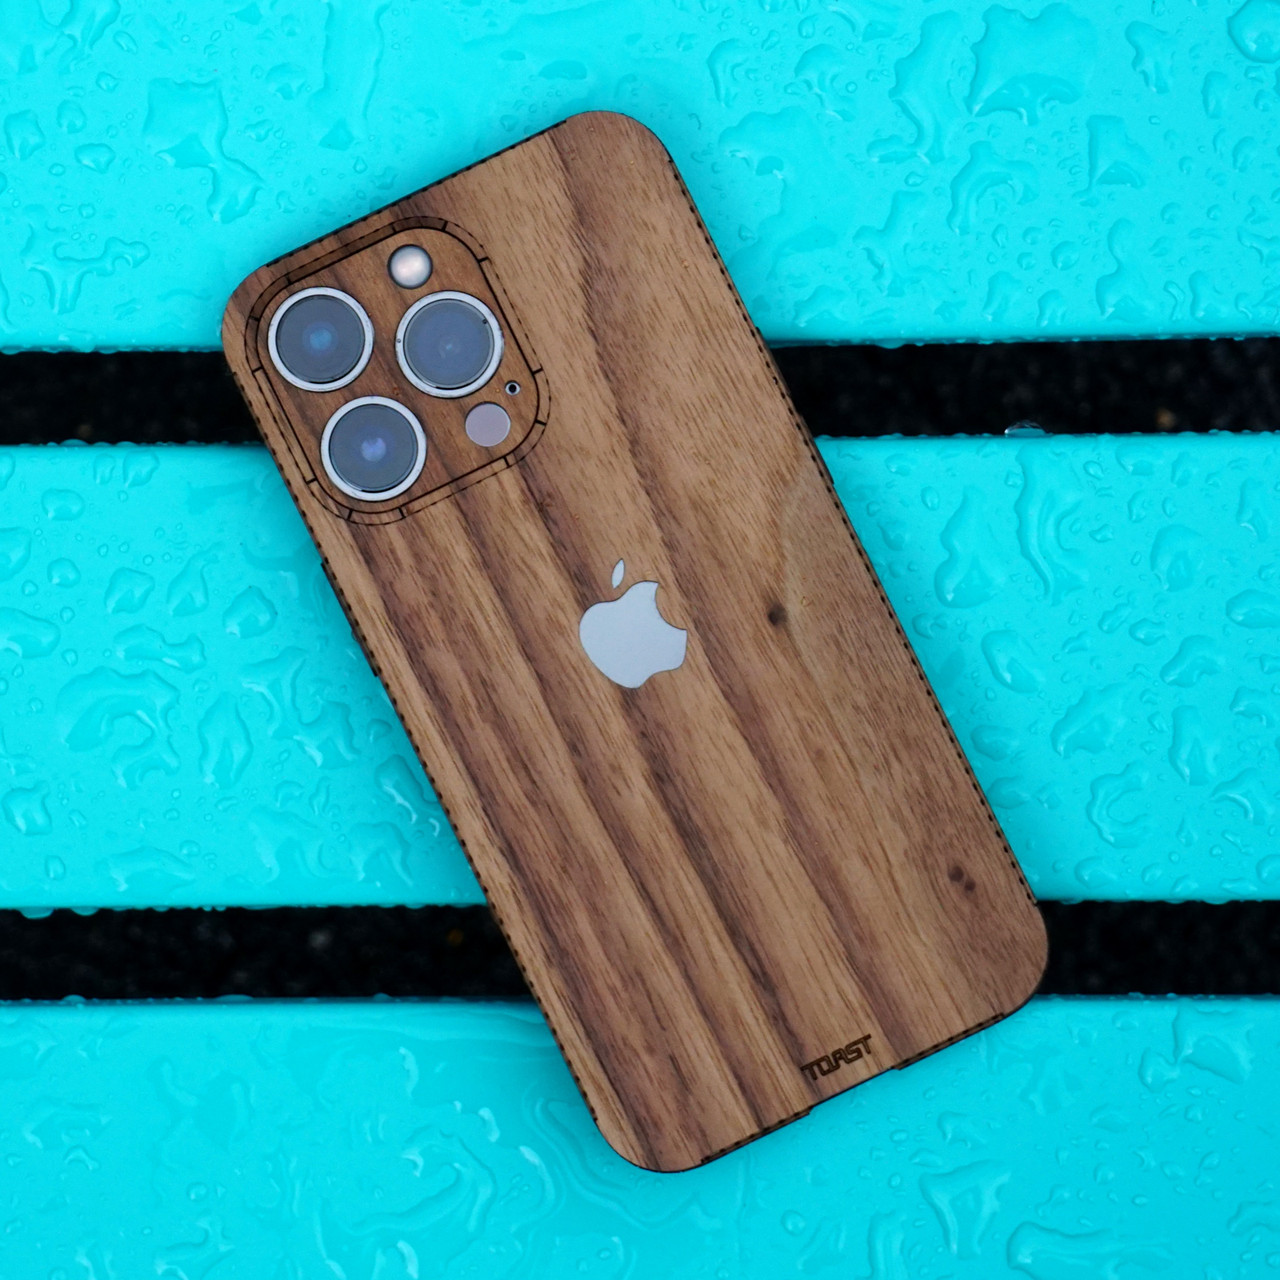 Toast Wood Cover for iPhone 14, 14 Max, 14 Pro, 14 Pro Max, Toast